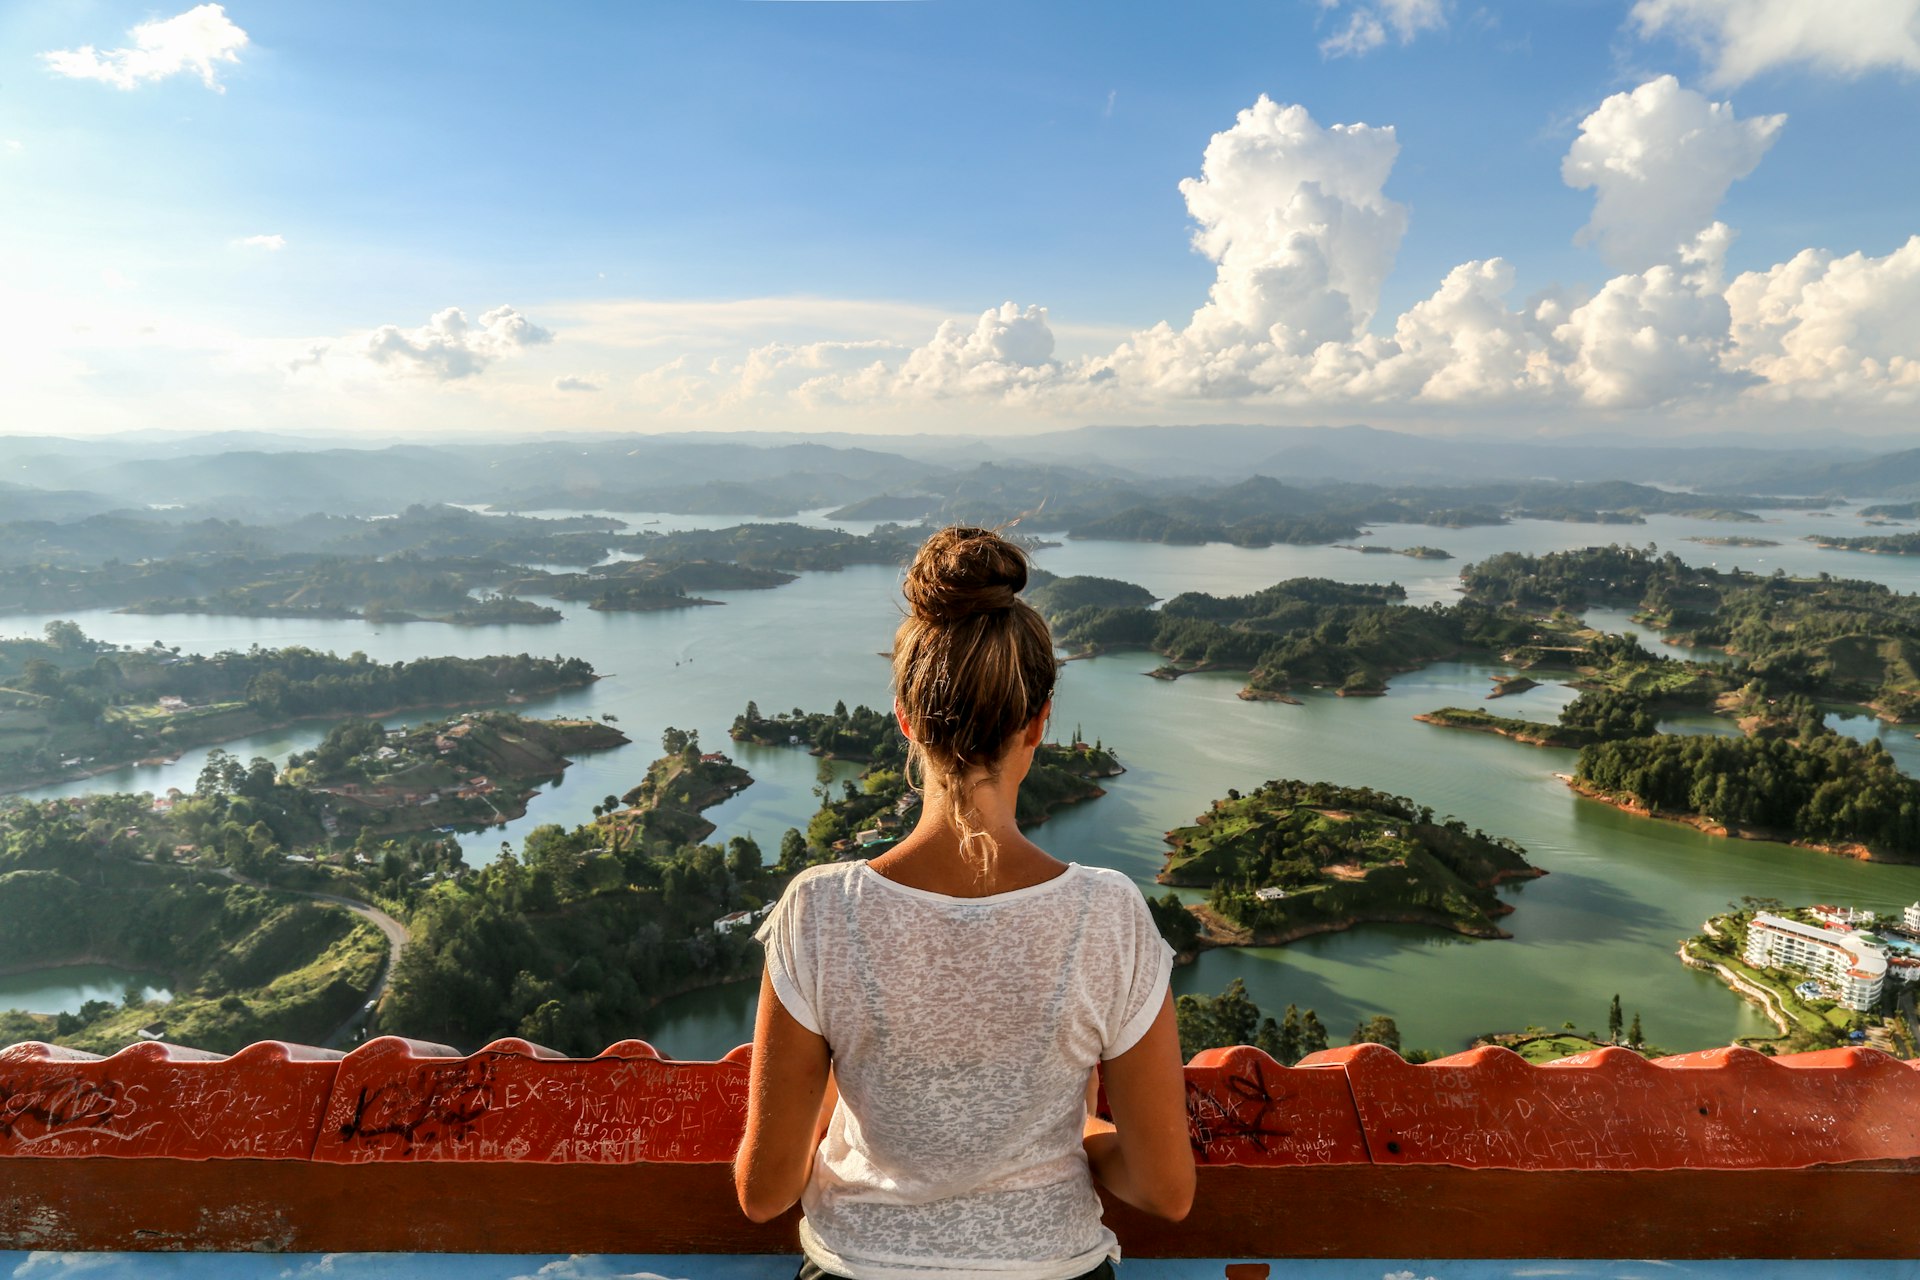 A girl seen from behind, looking out over Guatape and the expansive lake system.